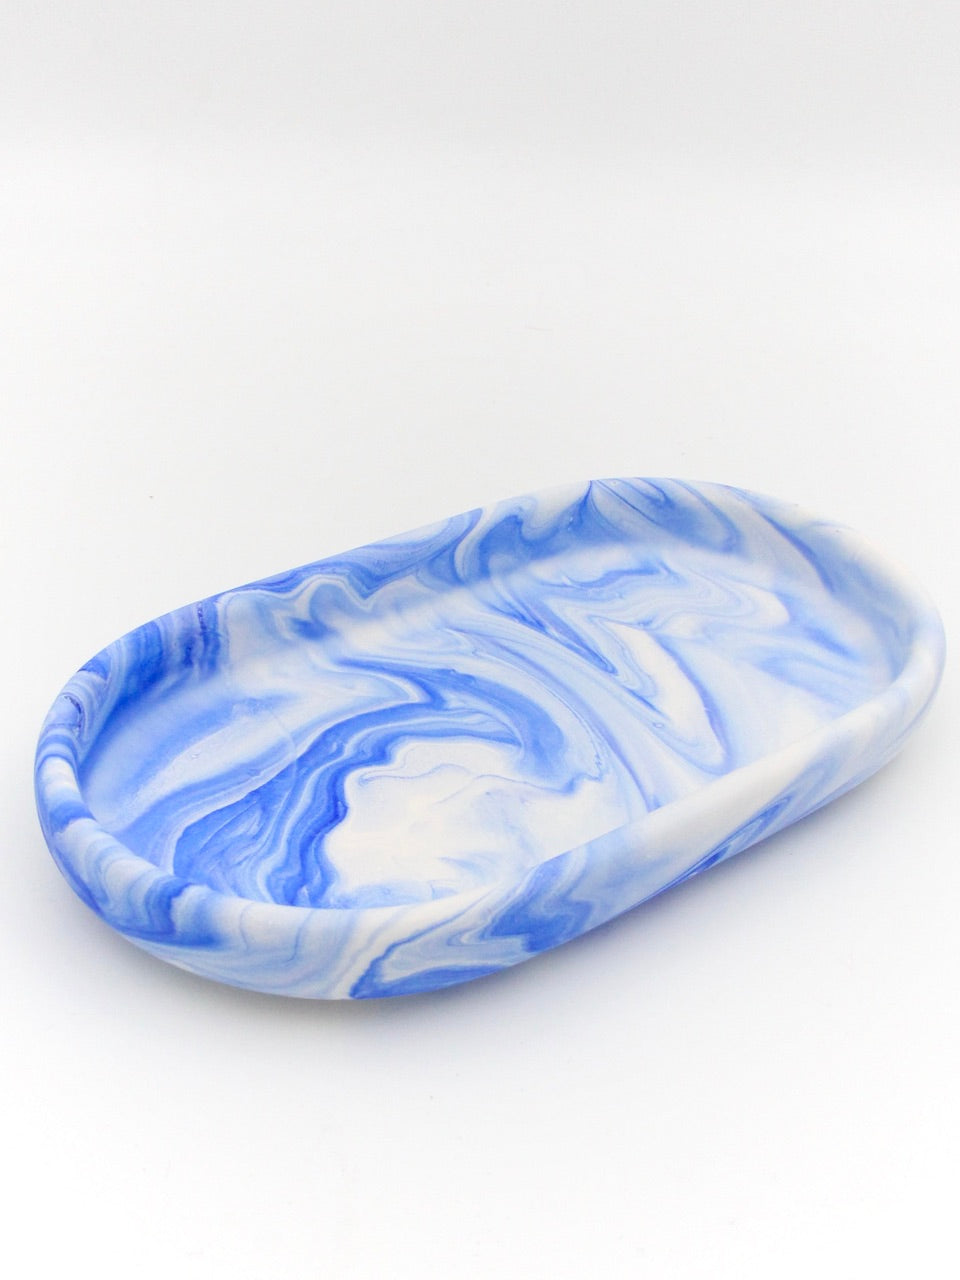 Decoration tray - With "marble"